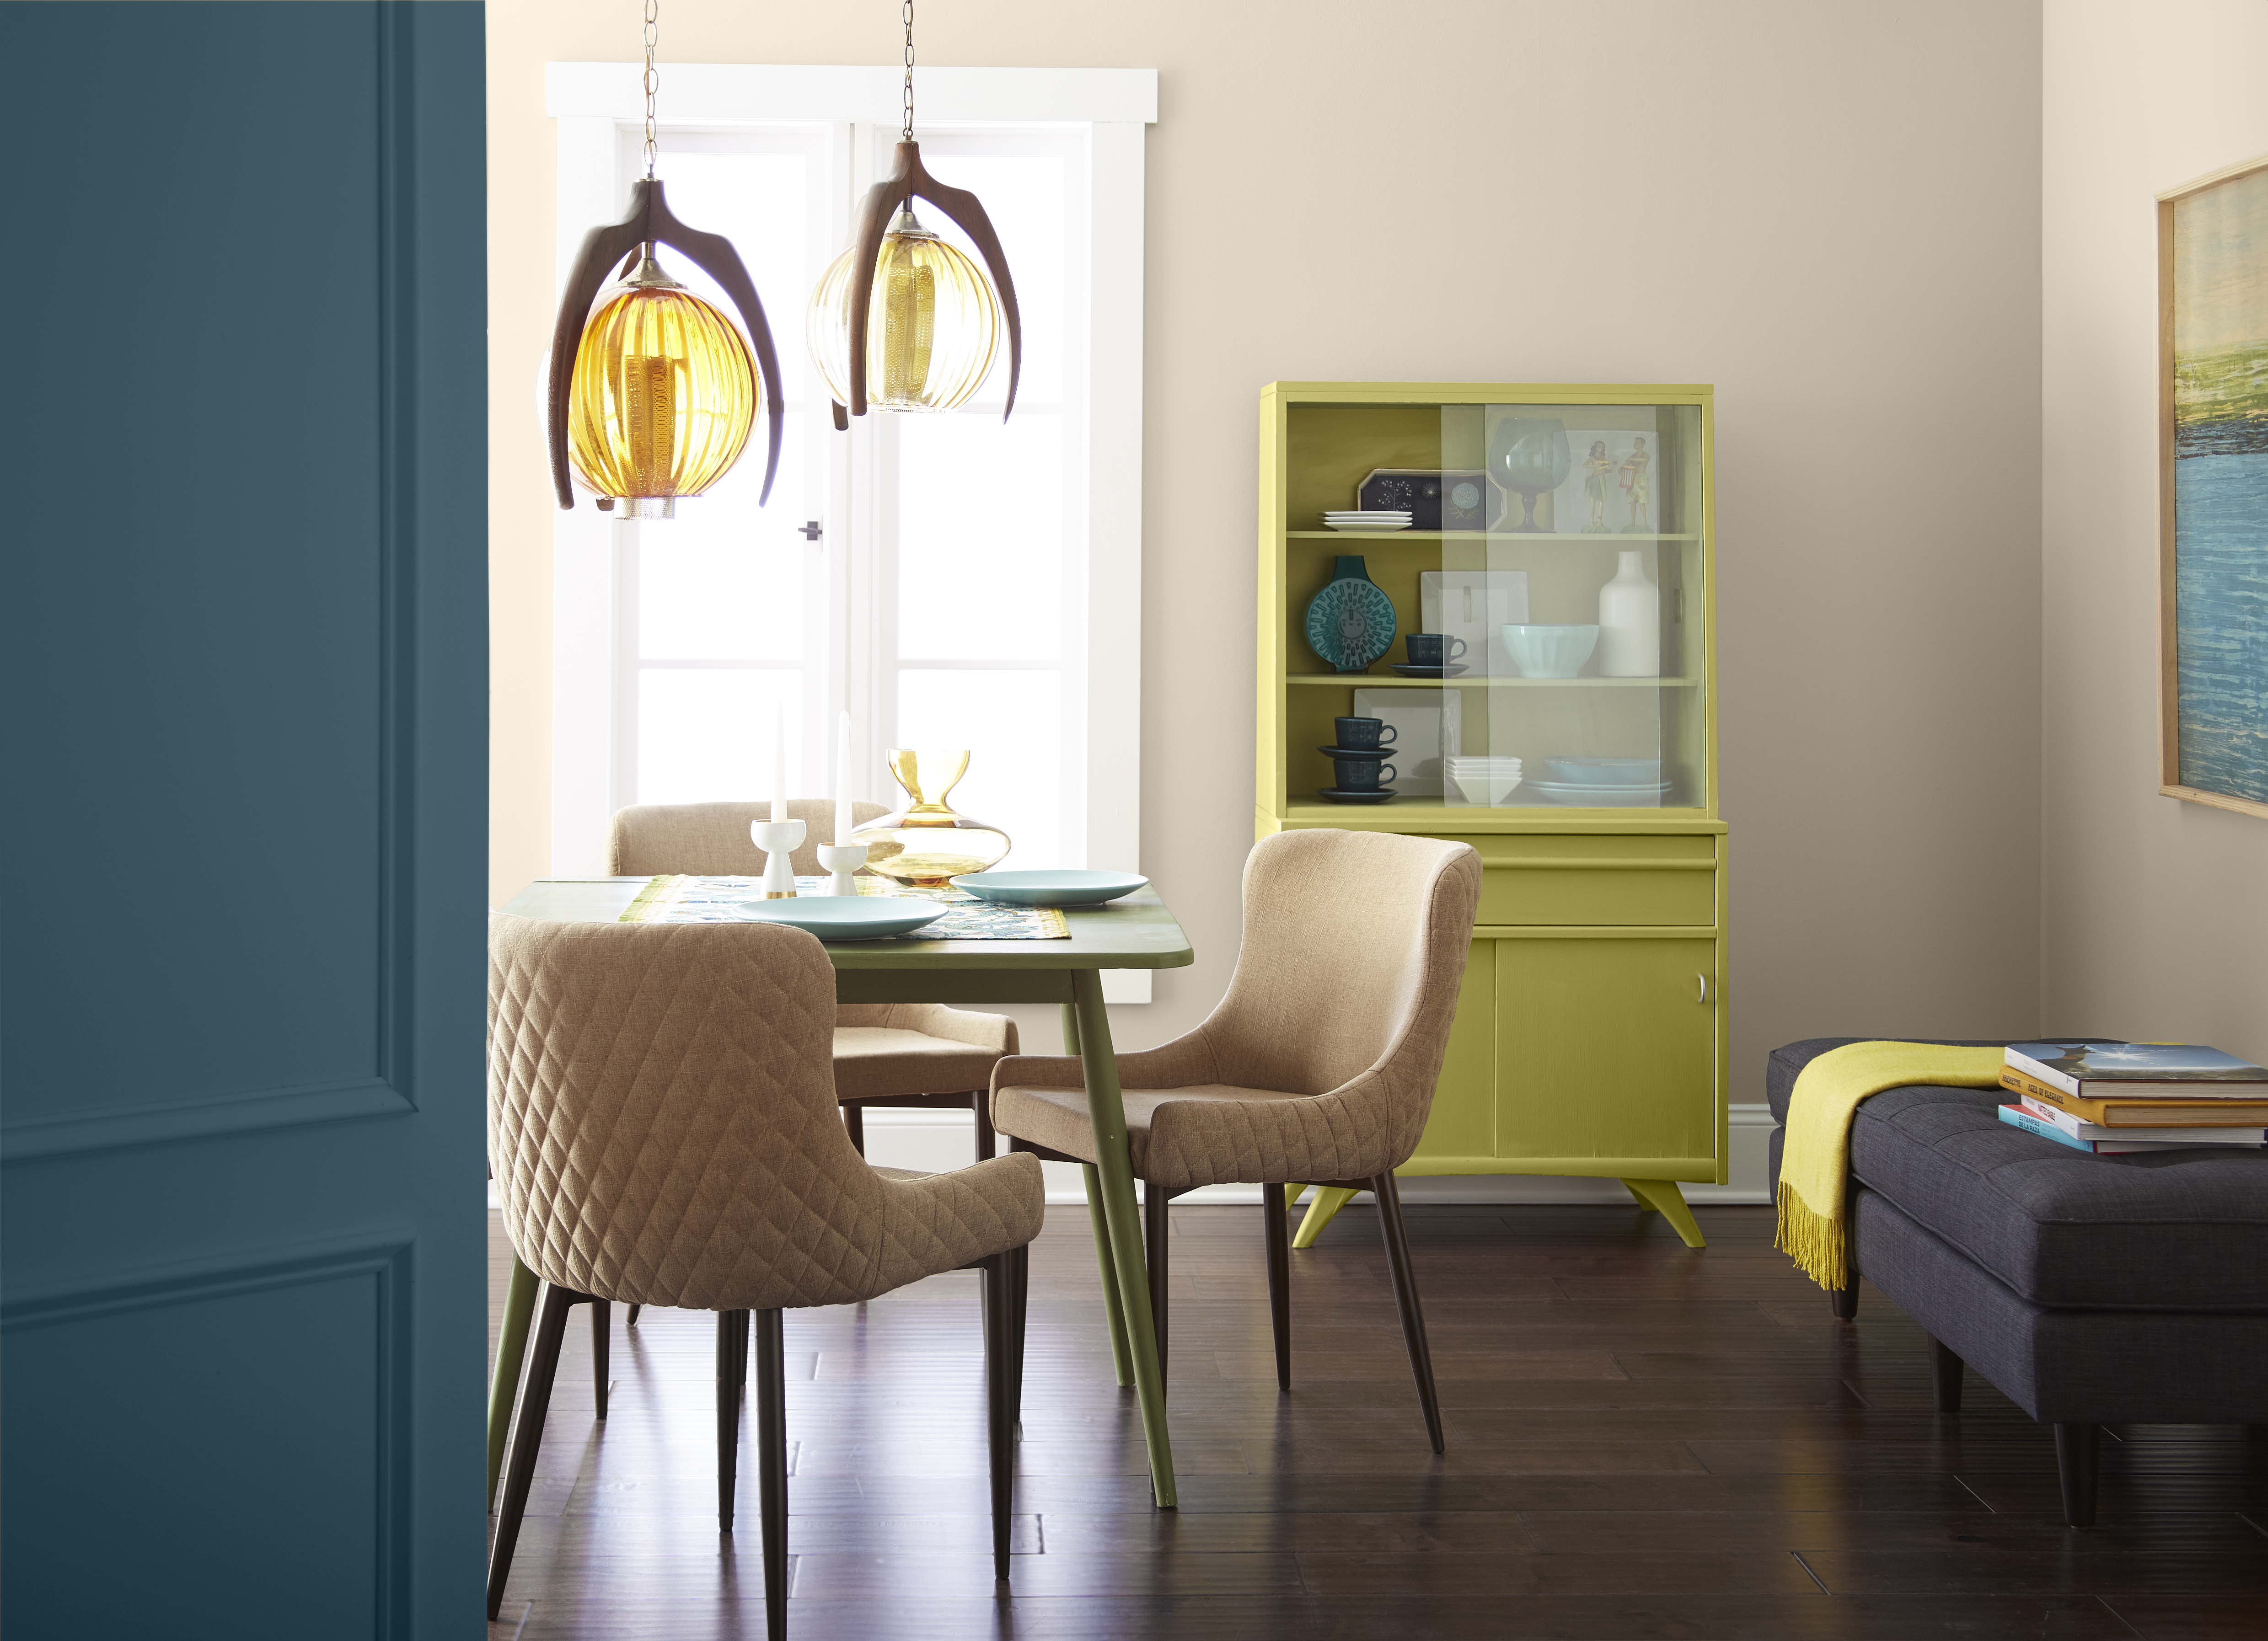 Retro-inspired dining room space with a cabinet painted in a bold light green